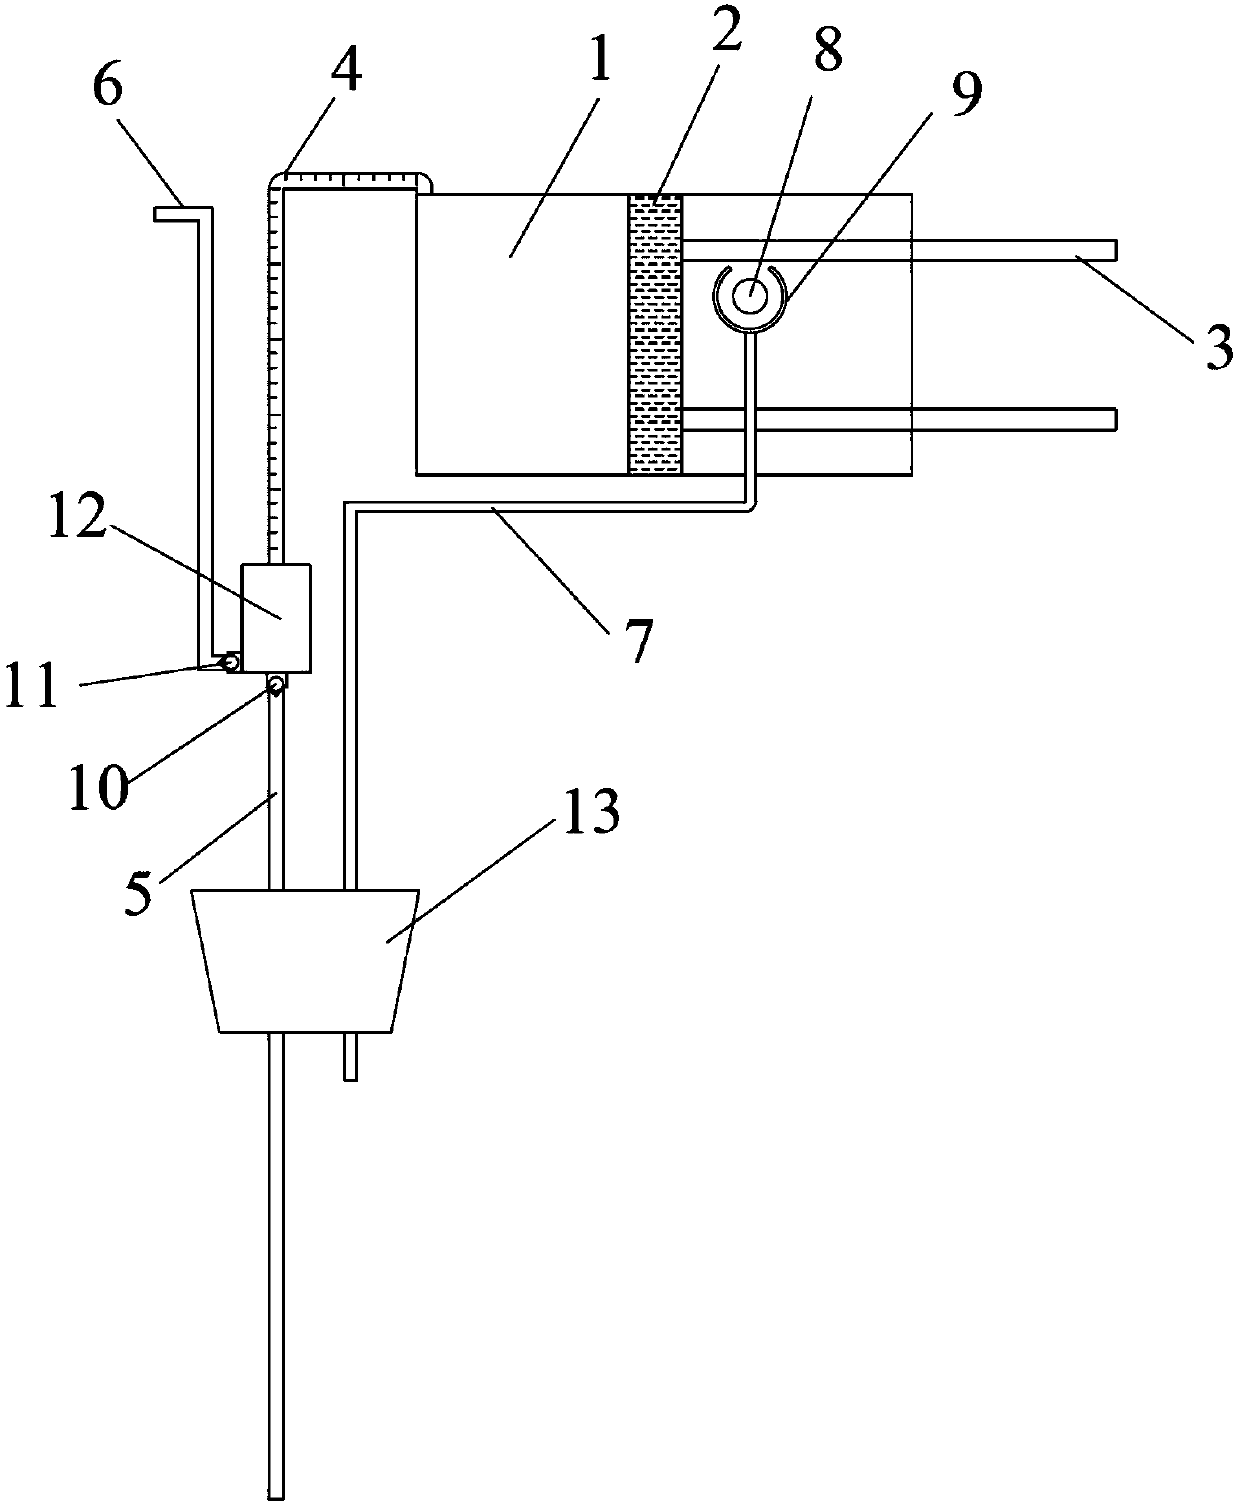 Initial positioning system and method for fluid flowmeter measuring